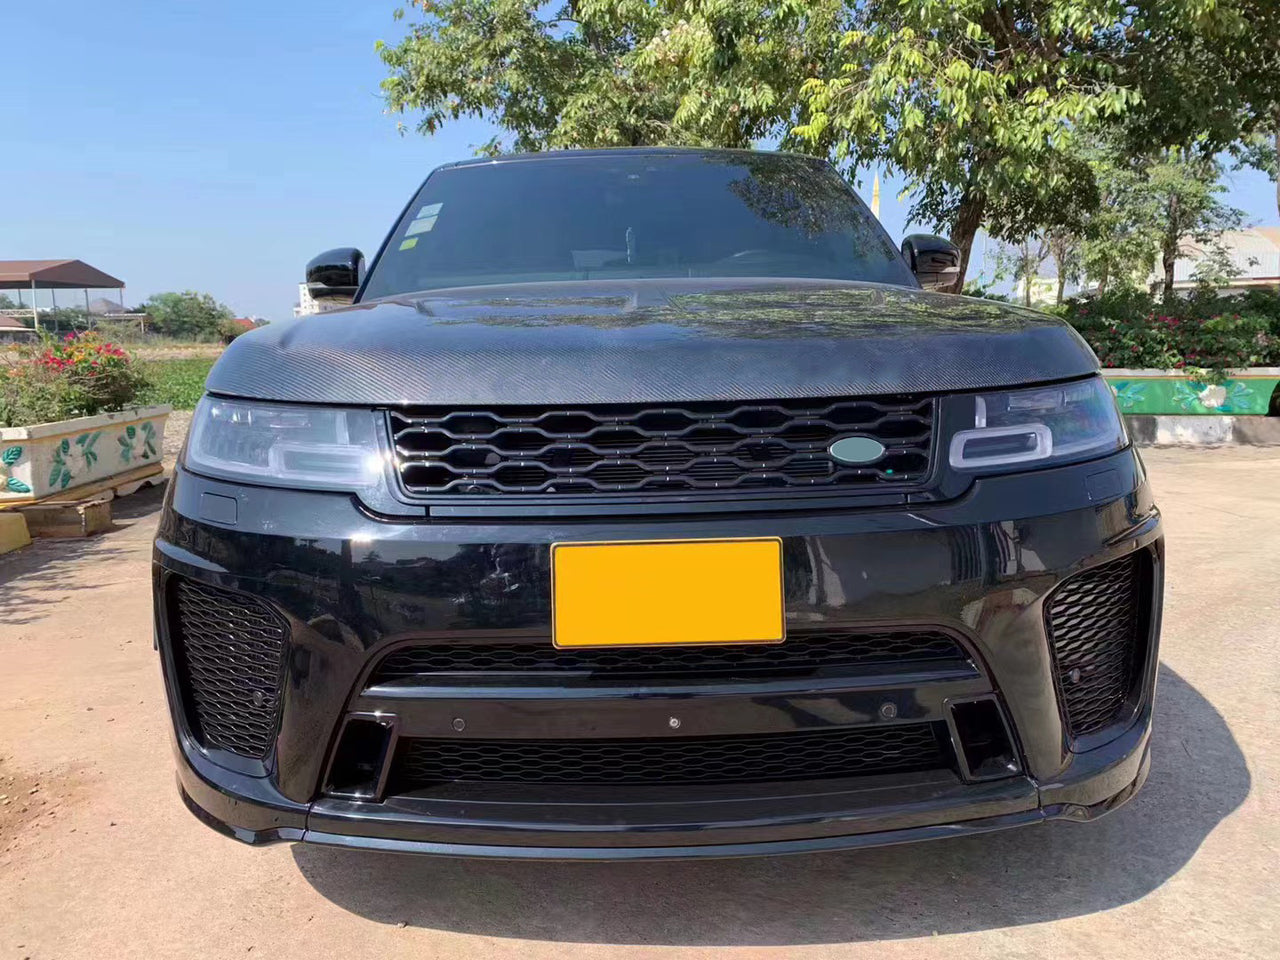 Range Rover sport SVR conversion from 2013 to 2018